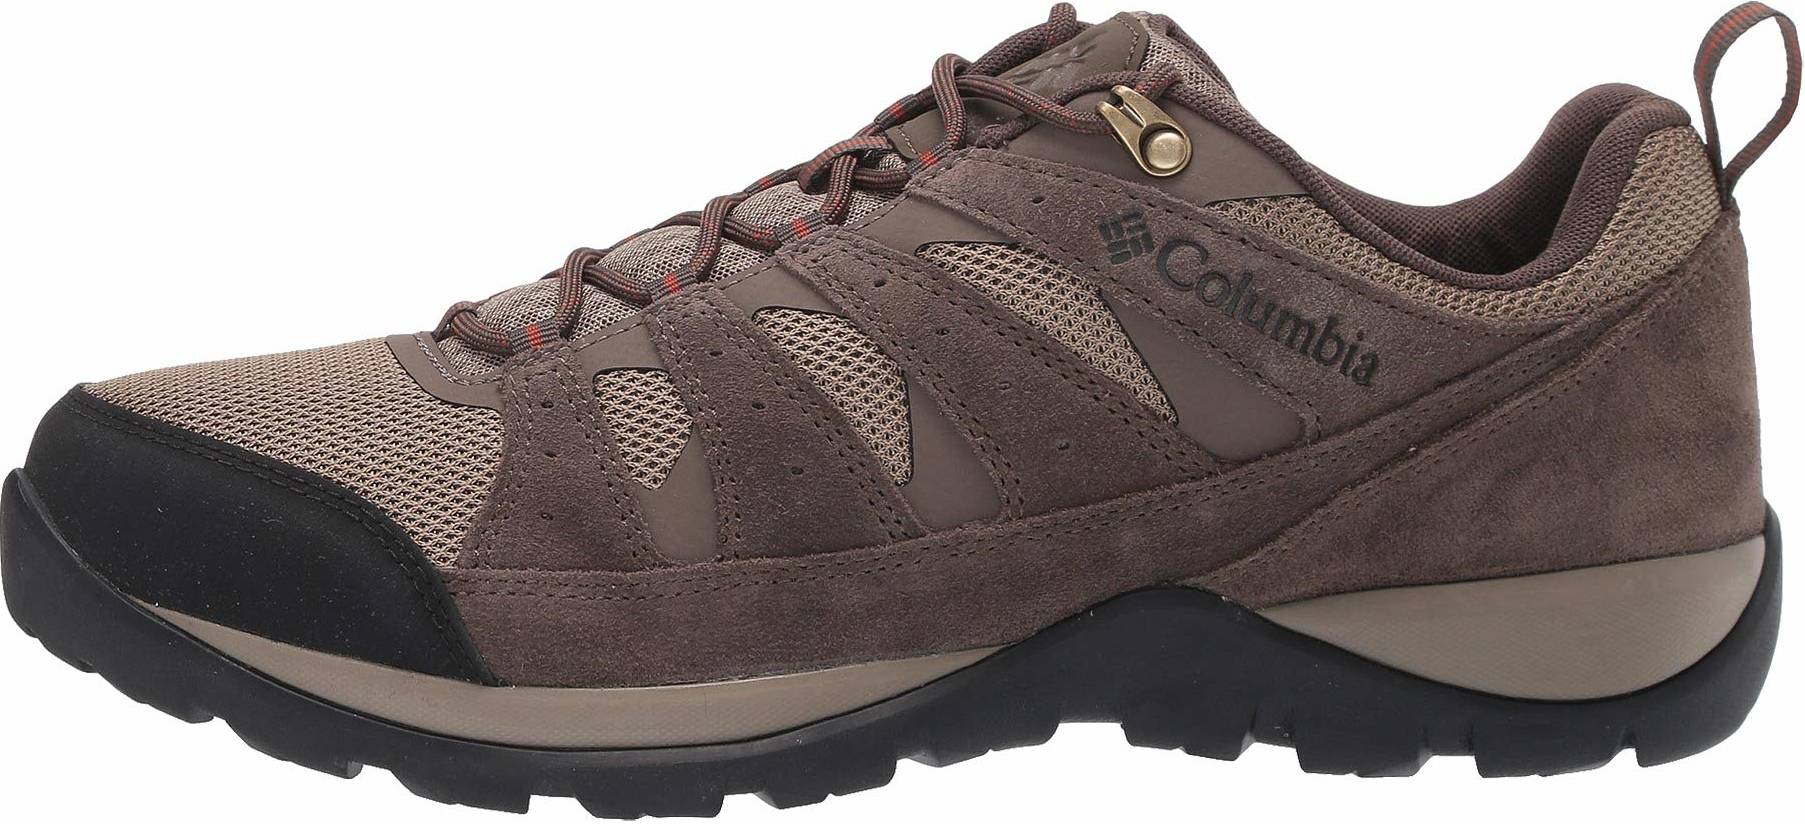 Save 14% on Wide Hiking Shoes (49 